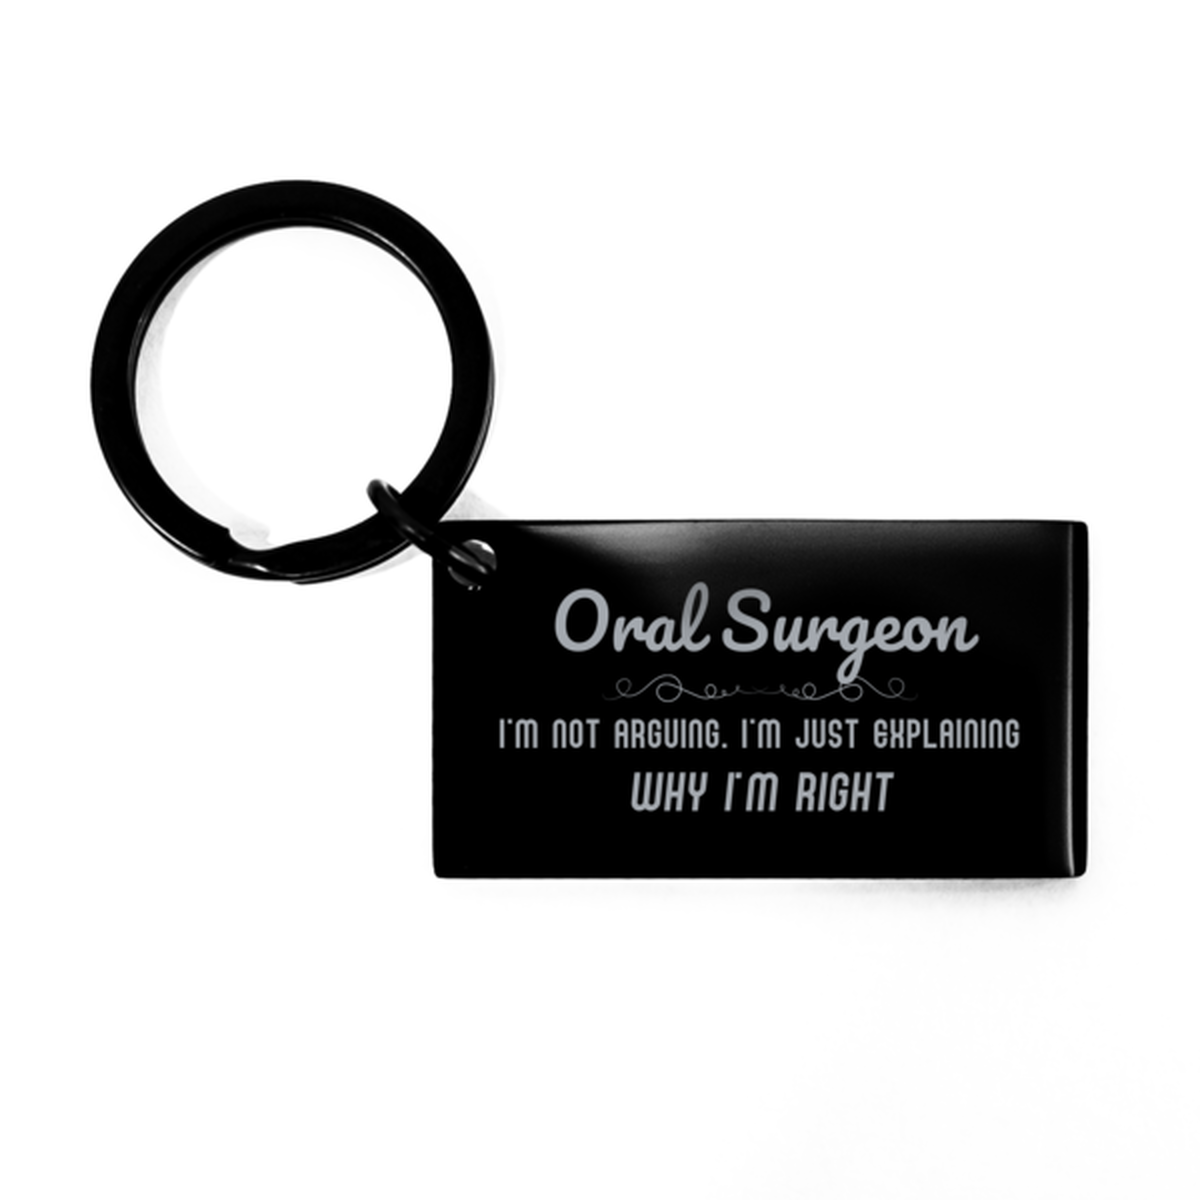 Oral Surgeon I'm not Arguing. I'm Just Explaining Why I'm RIGHT Keychain, Funny Saying Quote Oral Surgeon Gifts For Oral Surgeon Graduation Birthday Christmas Gifts for Men Women Coworker